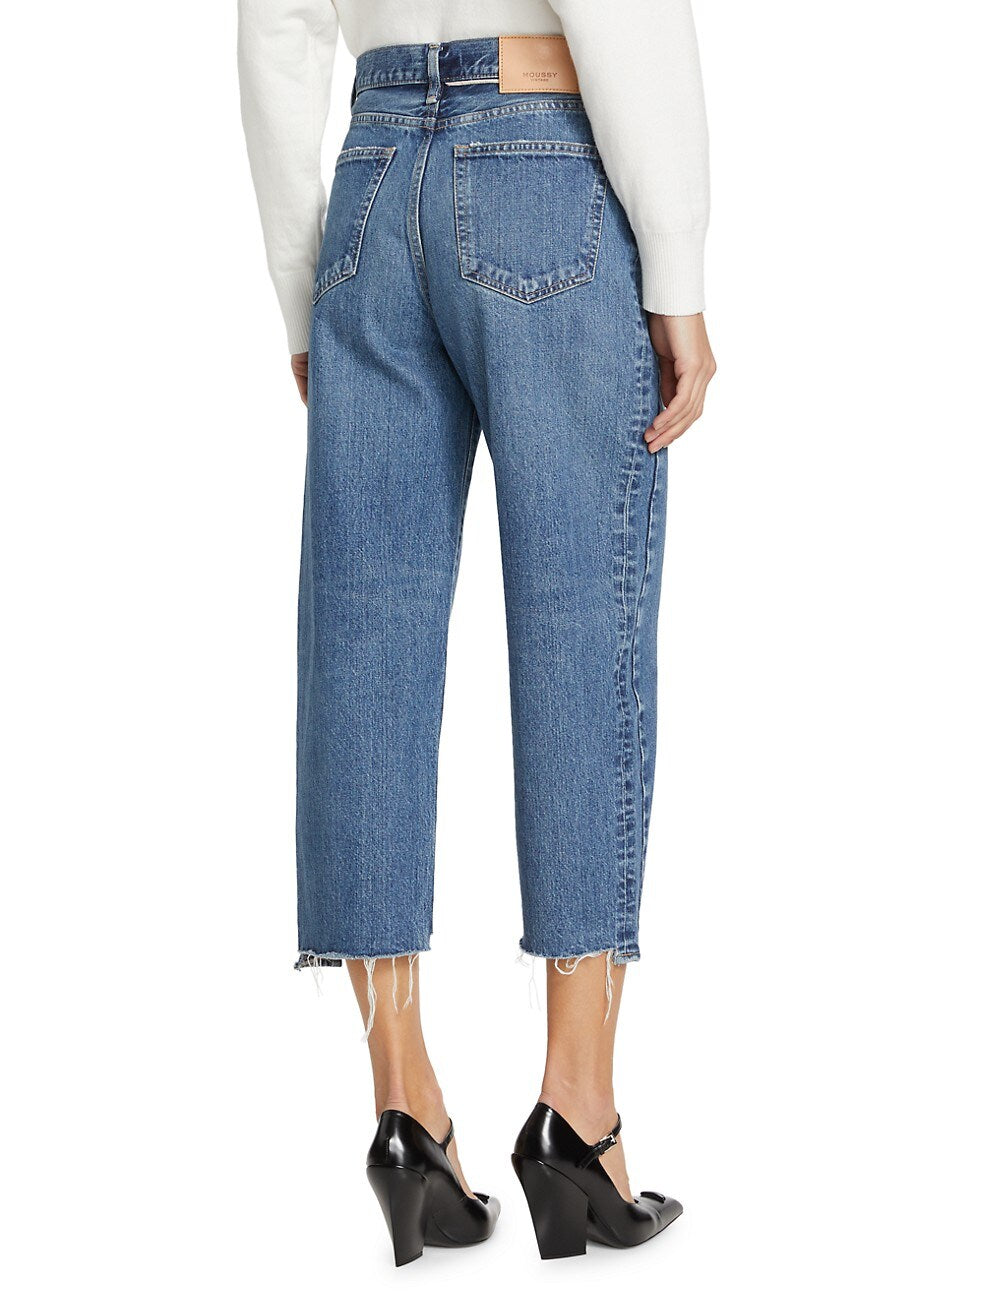 Moussy Dunkirk Jeans